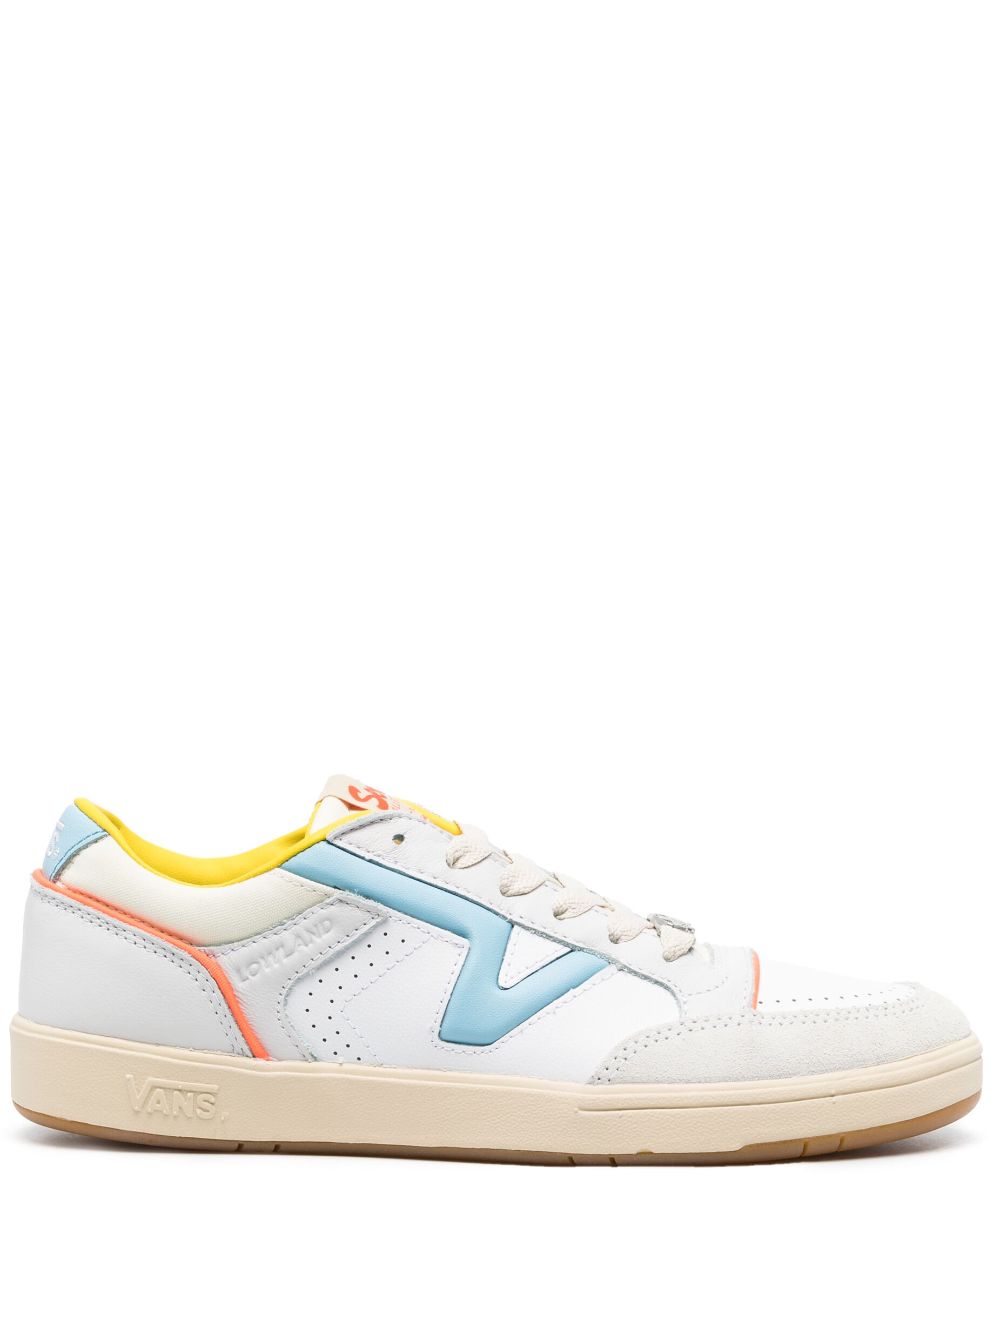 Vans The Serio Collection low-top Sneakers - Farfetch